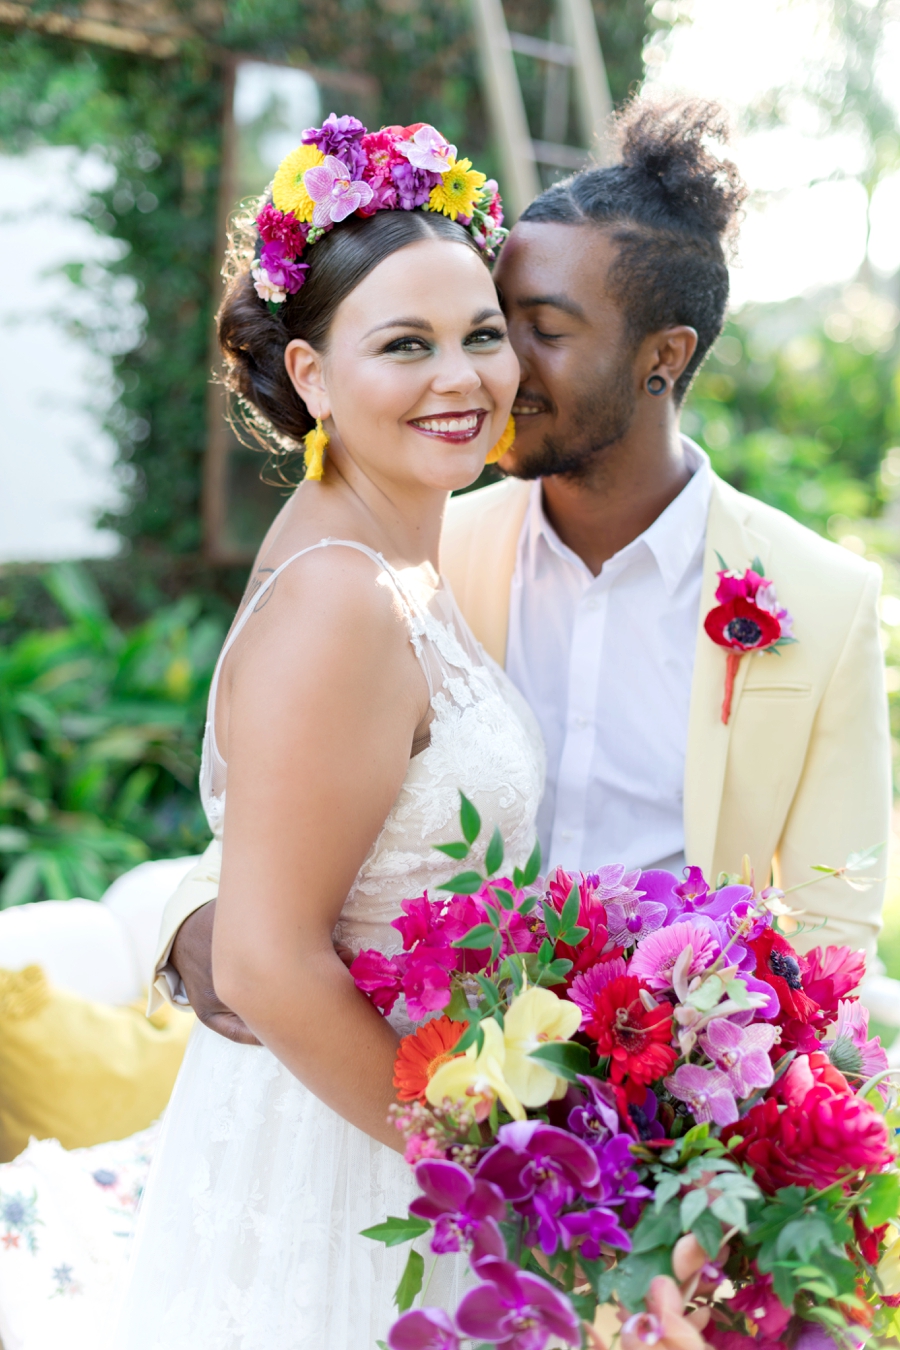 Colorful Wedding Ideas Inspired By Mexico via TheELD.com